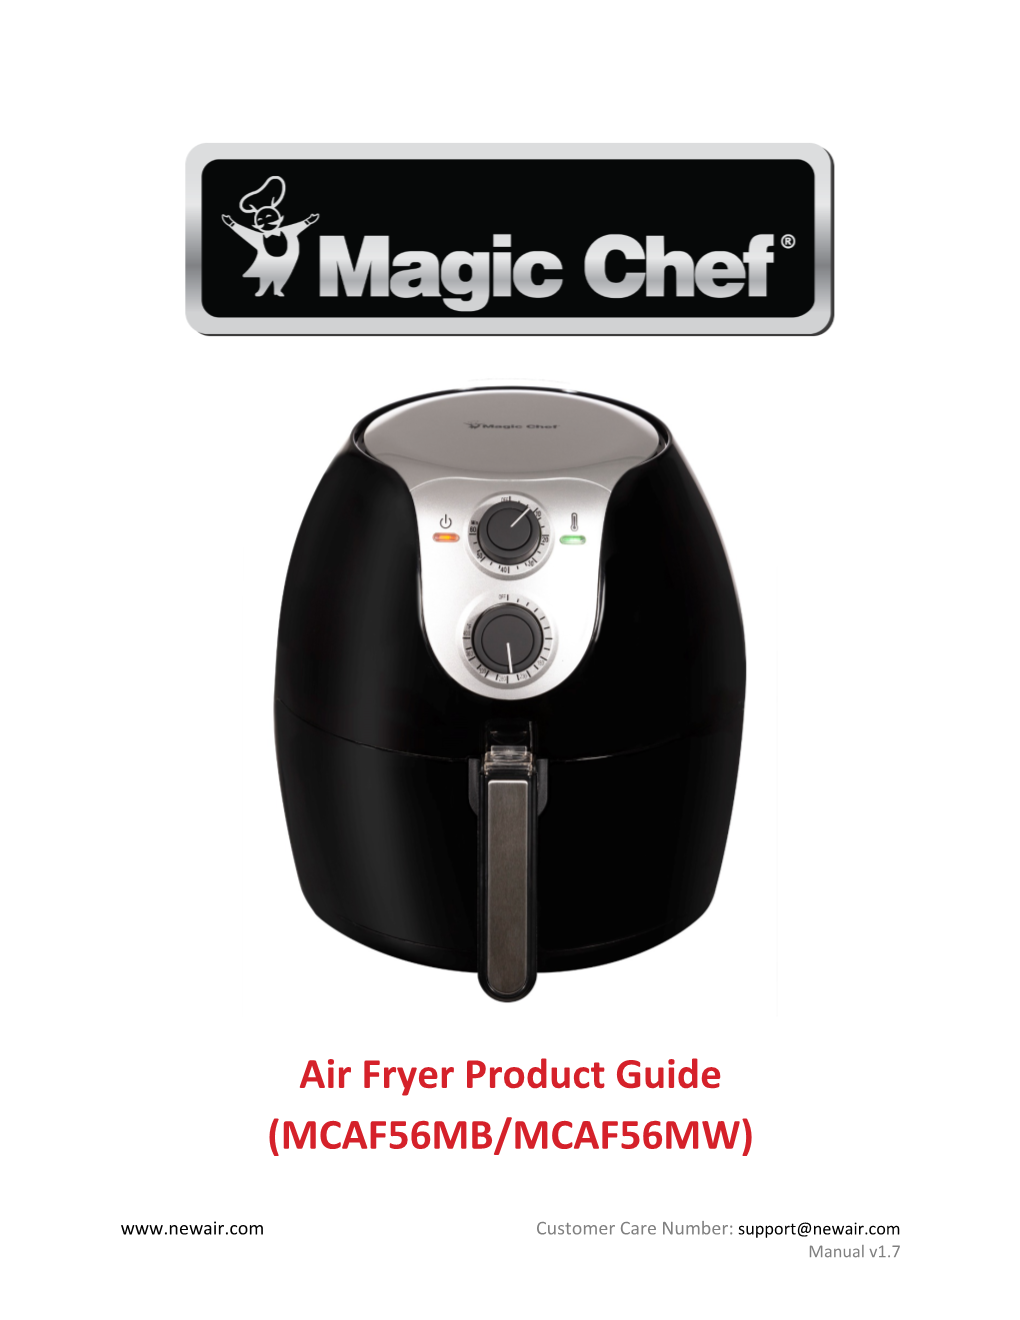 Air Fryer Product Guide (MCAF56MB/MCAF56MW)